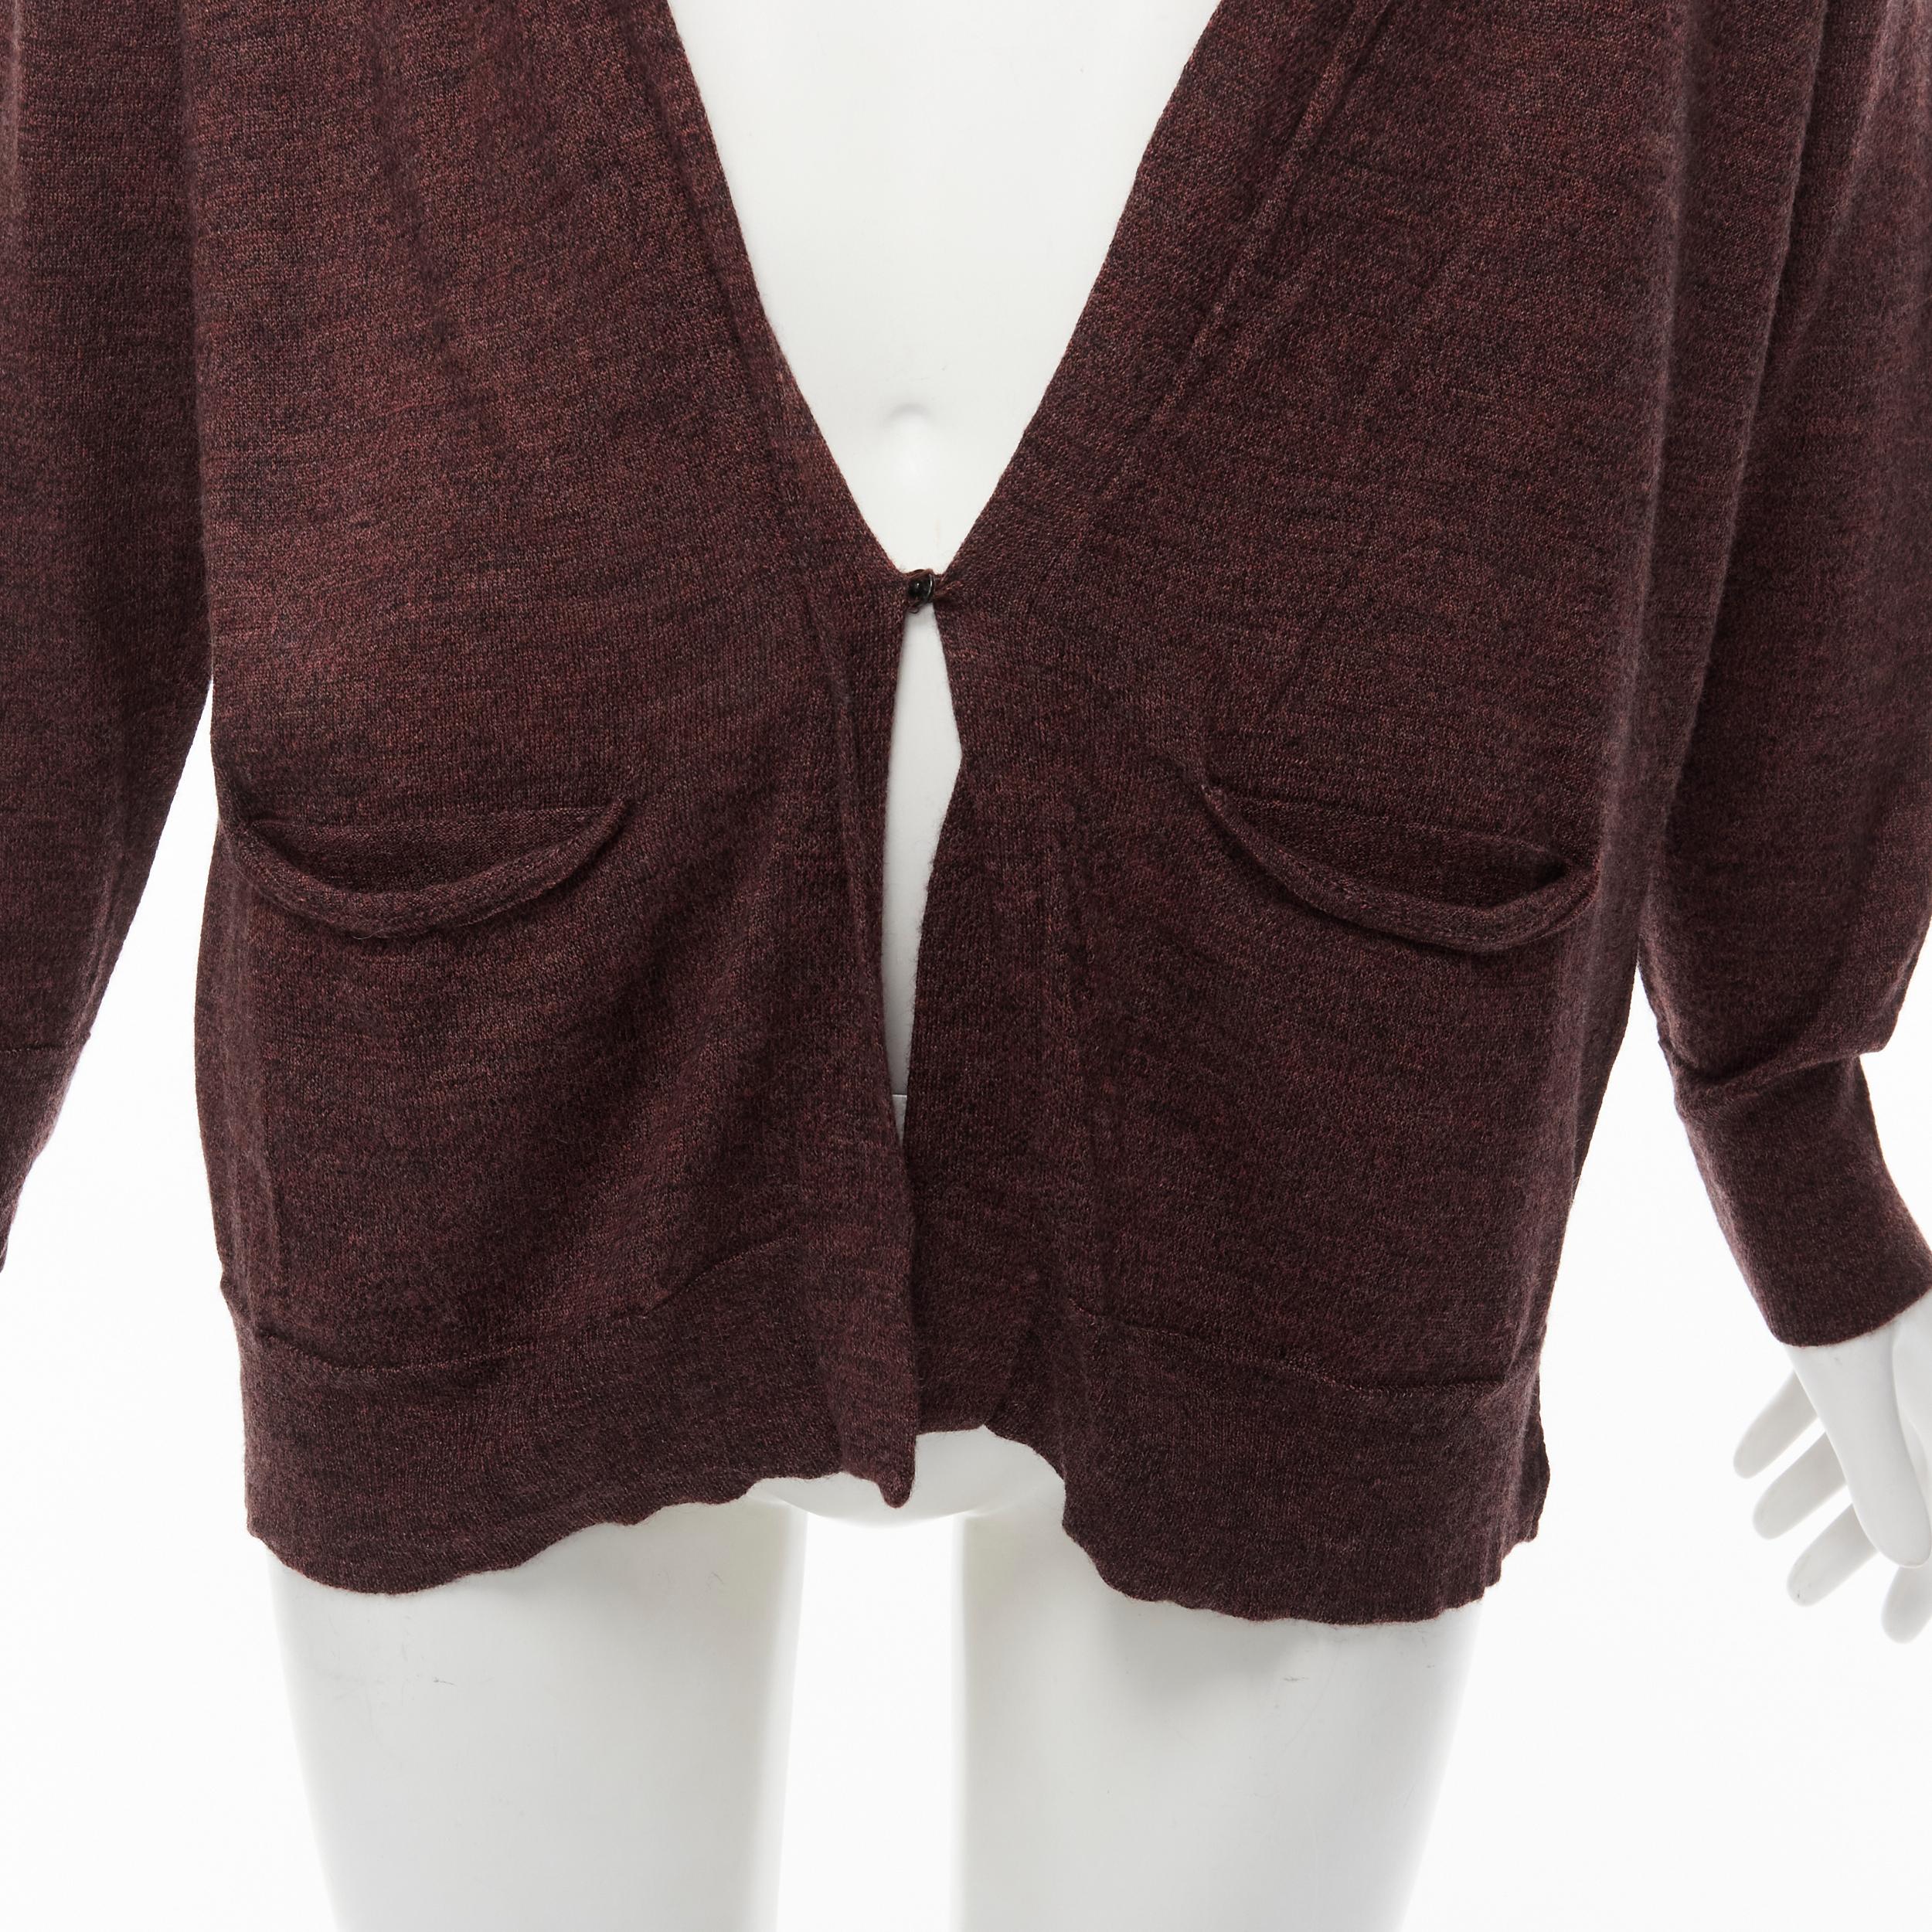 ISABEL MARANT brown 100% mercerised wool single button cardigan Sz. 1 S
Reference: YNWG/A00152
Brand: Isabel Marant
Designer: Isabel Marant
Material: Wool
Color: Brown
Pattern: Solid
Closure: Snap Buttons

CONDITION:
Condition: Very good, this item